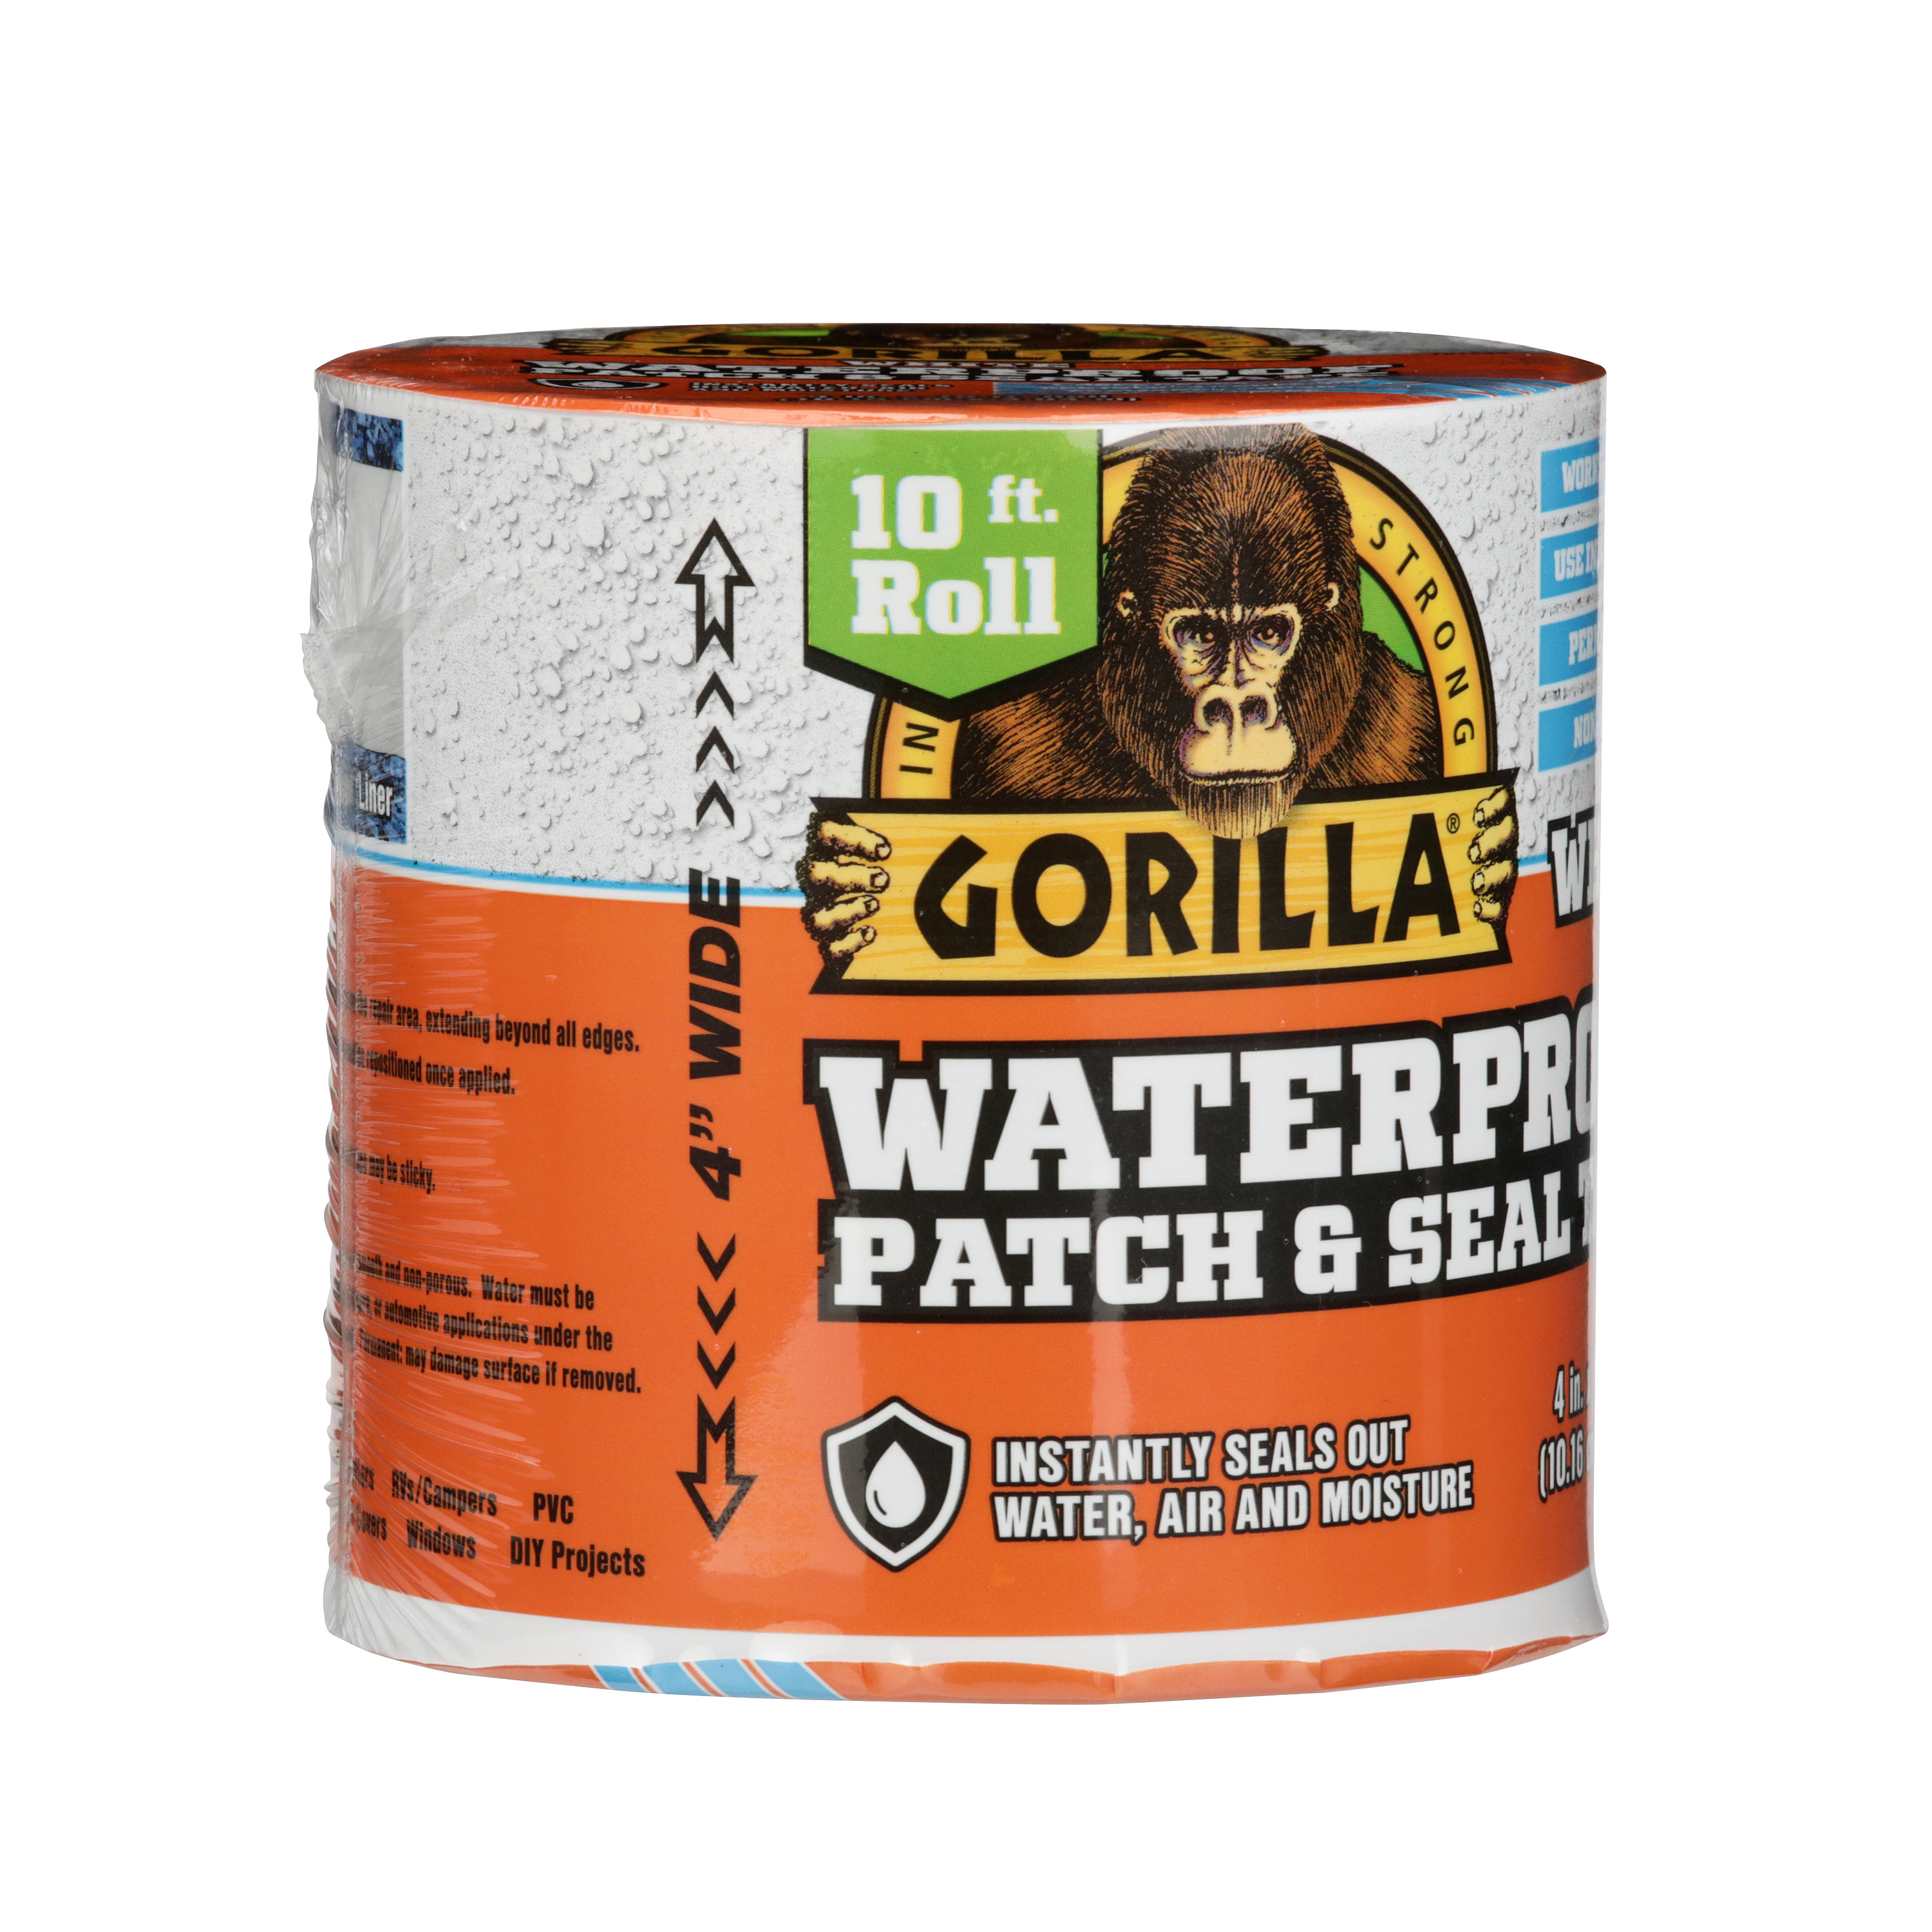 Gorilla 10 ft. Waterproof Patch and Seal Tape White 101895 - The